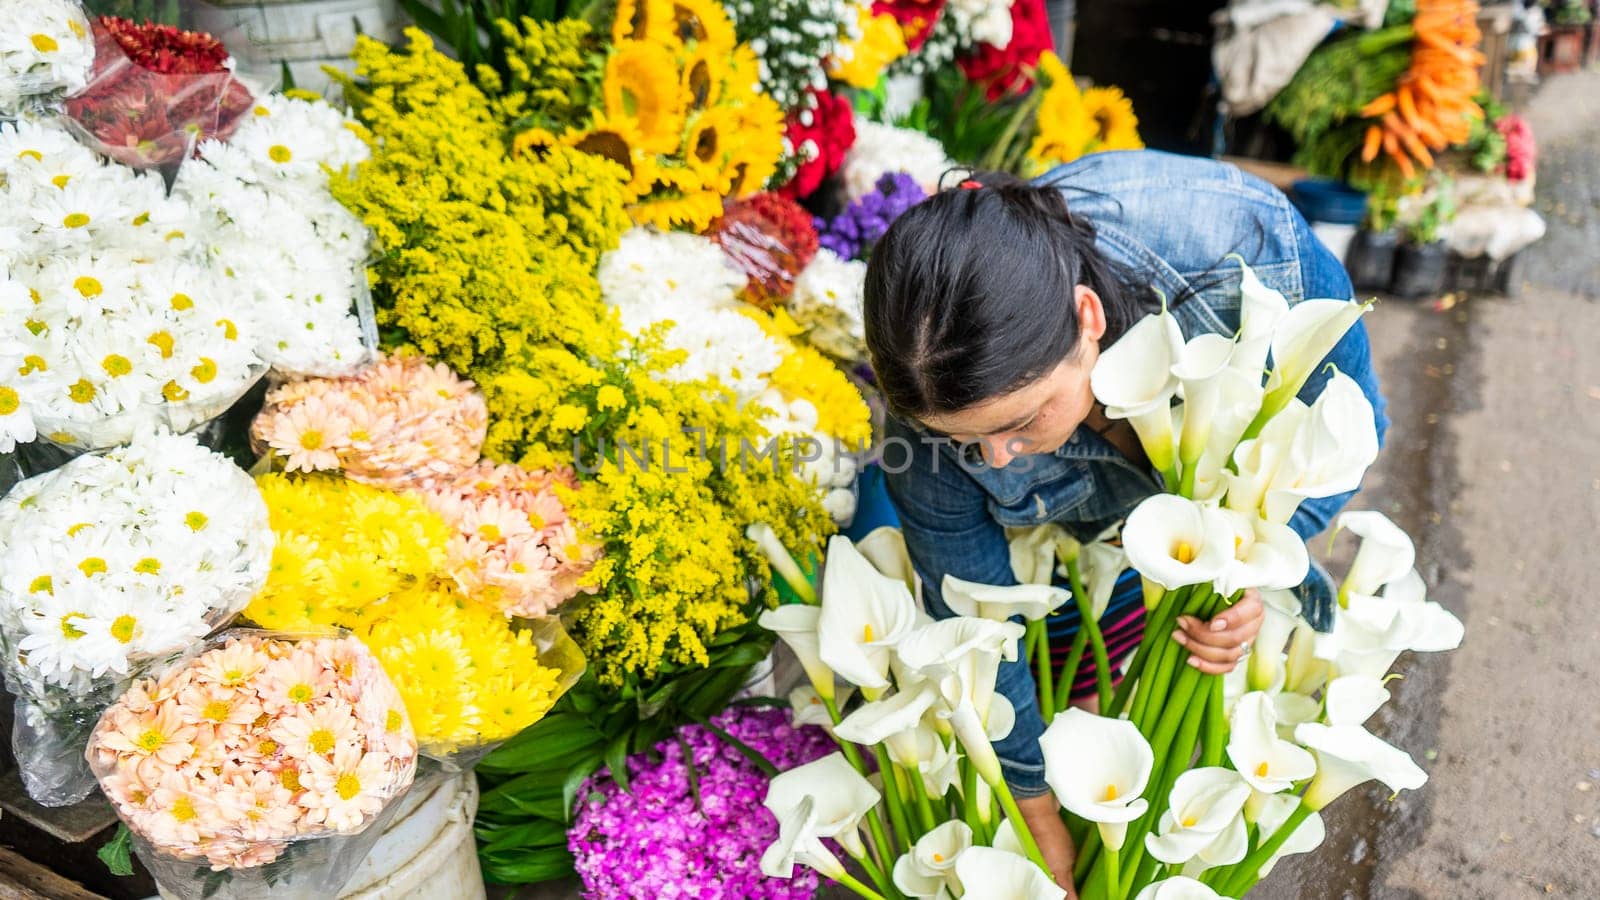 Woman tending a small retail business selling flowers in Nicaragua, Latin America, Central America